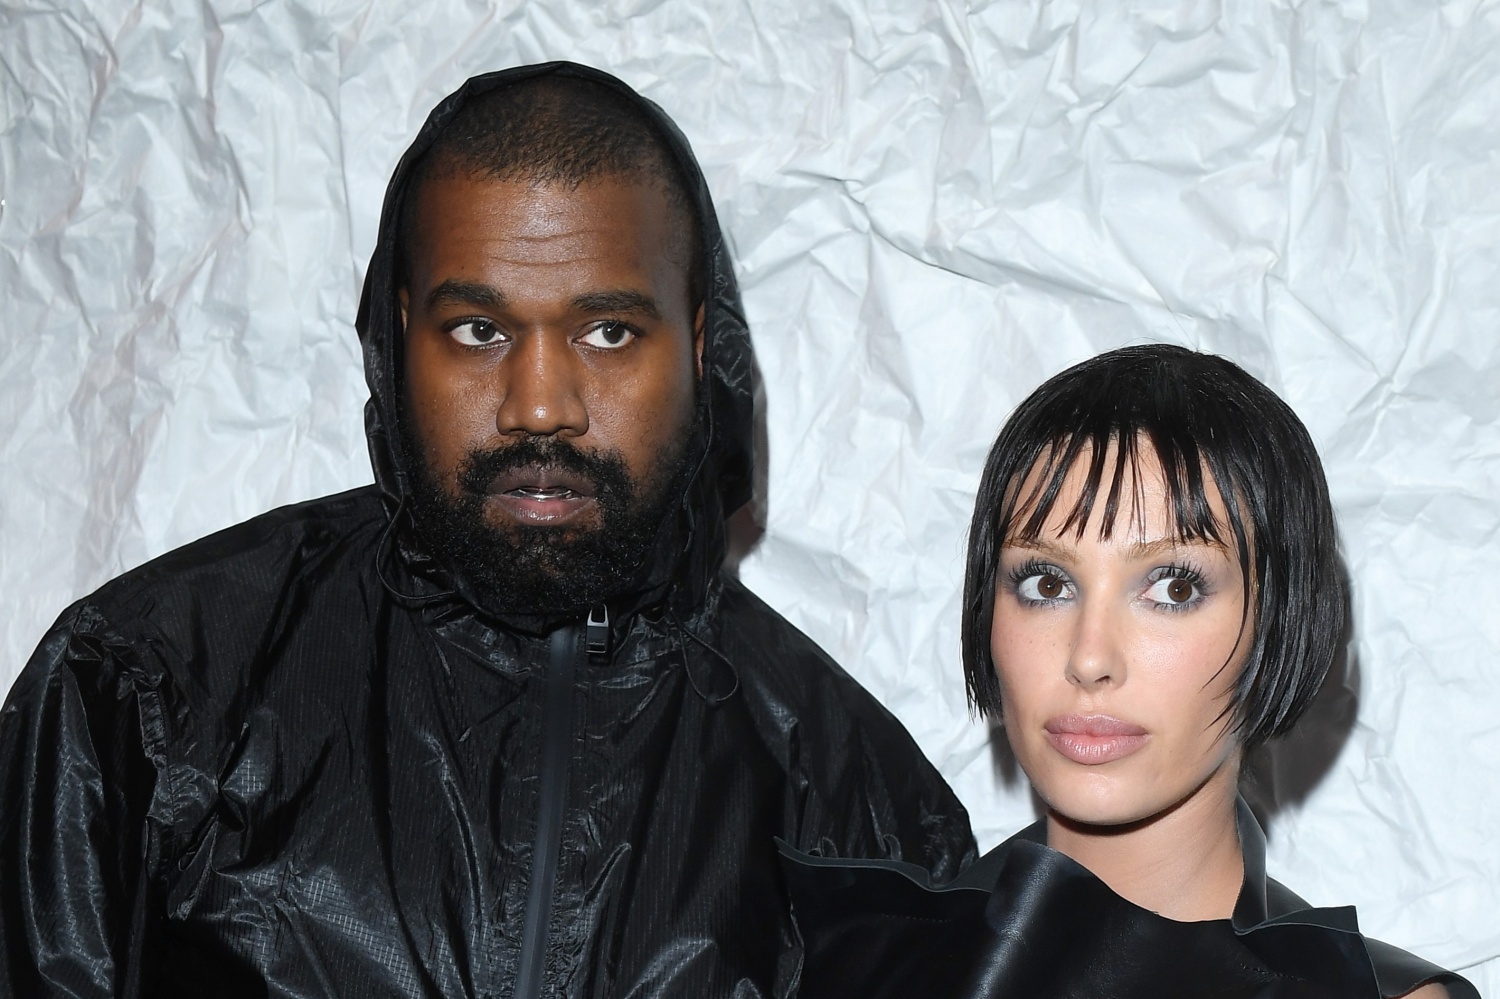 Expert says Bianca Censori’s motivation empowers Kanye West’s ventures, strengthens their marriage